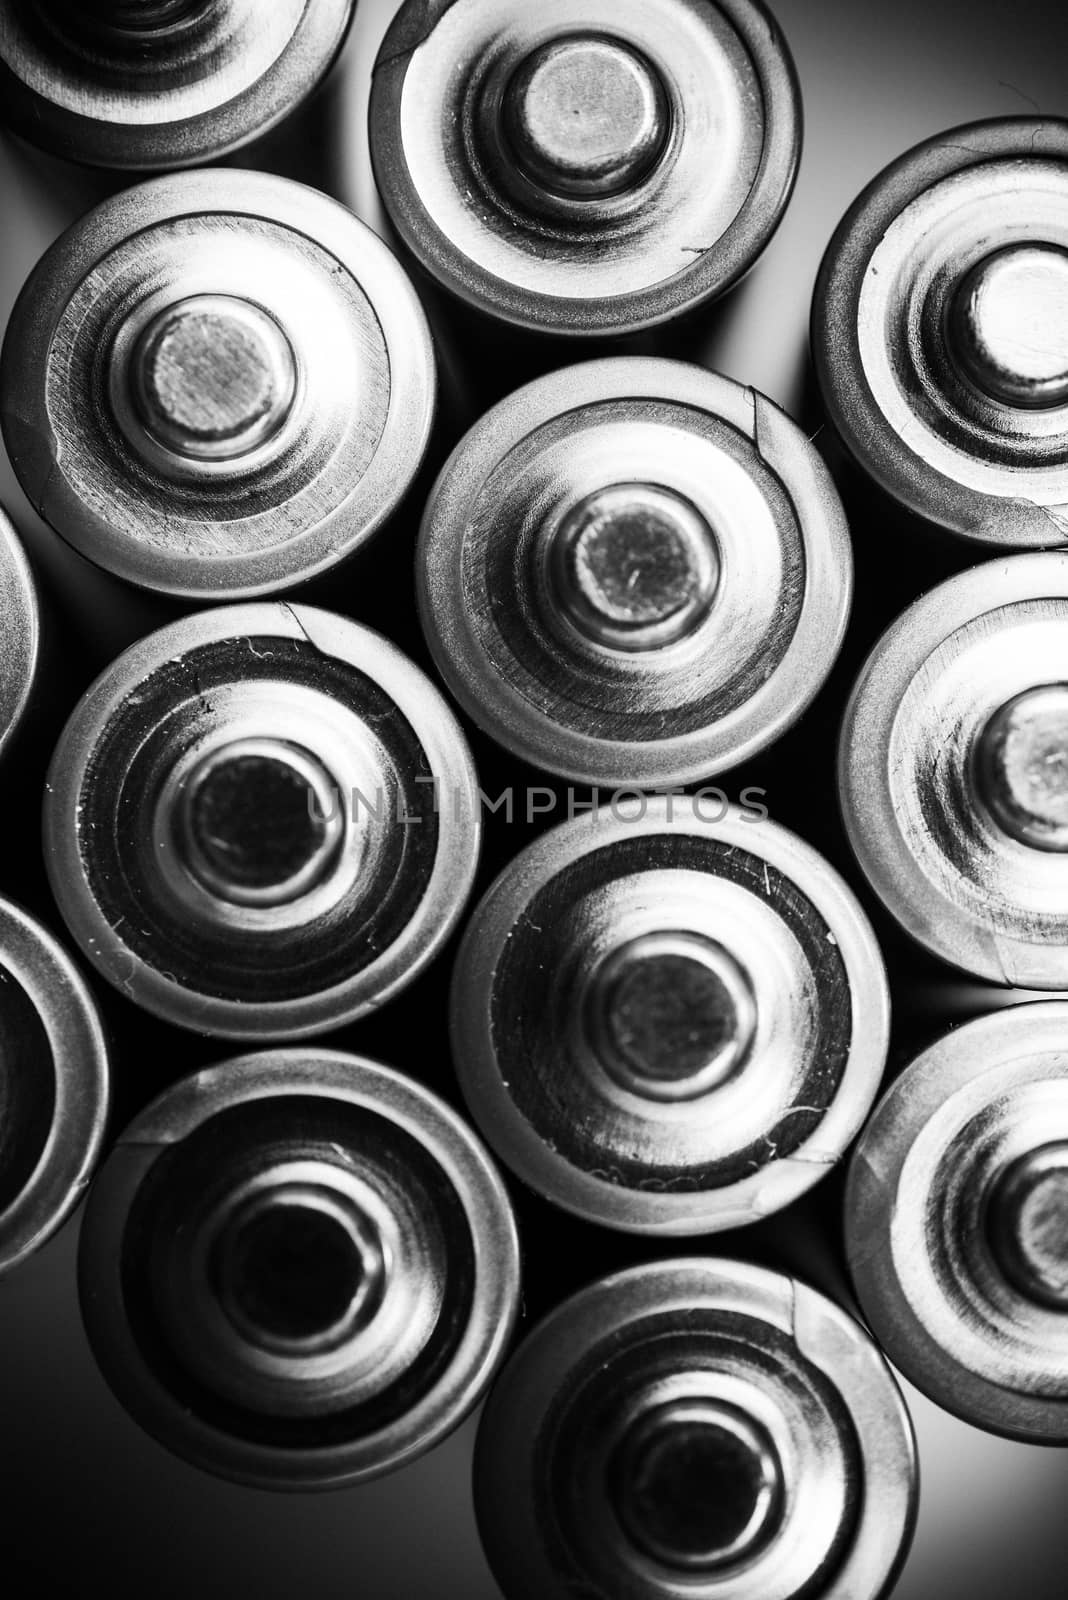 Energy Inside the Batteries. Mobile Power Industry Concept. AA Batteries From the Top. Vertical Black and White Photo